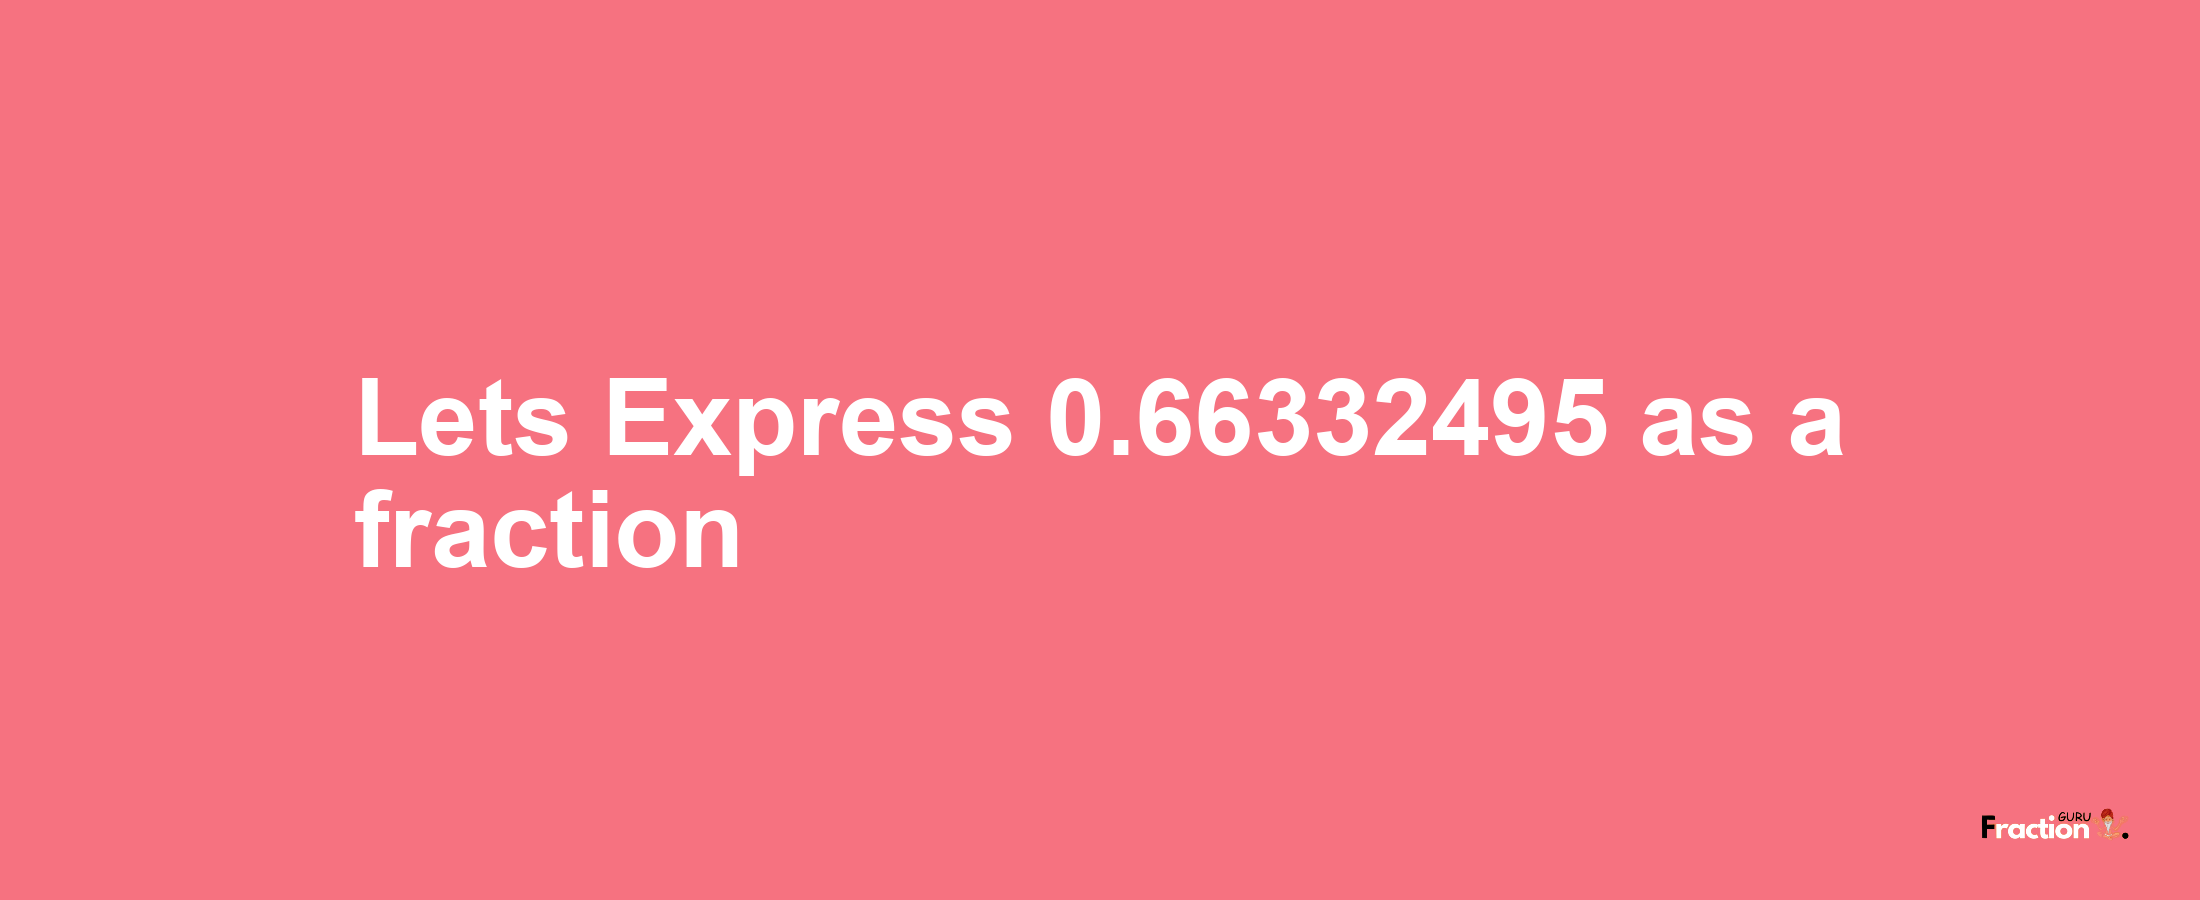 Lets Express 0.66332495 as afraction